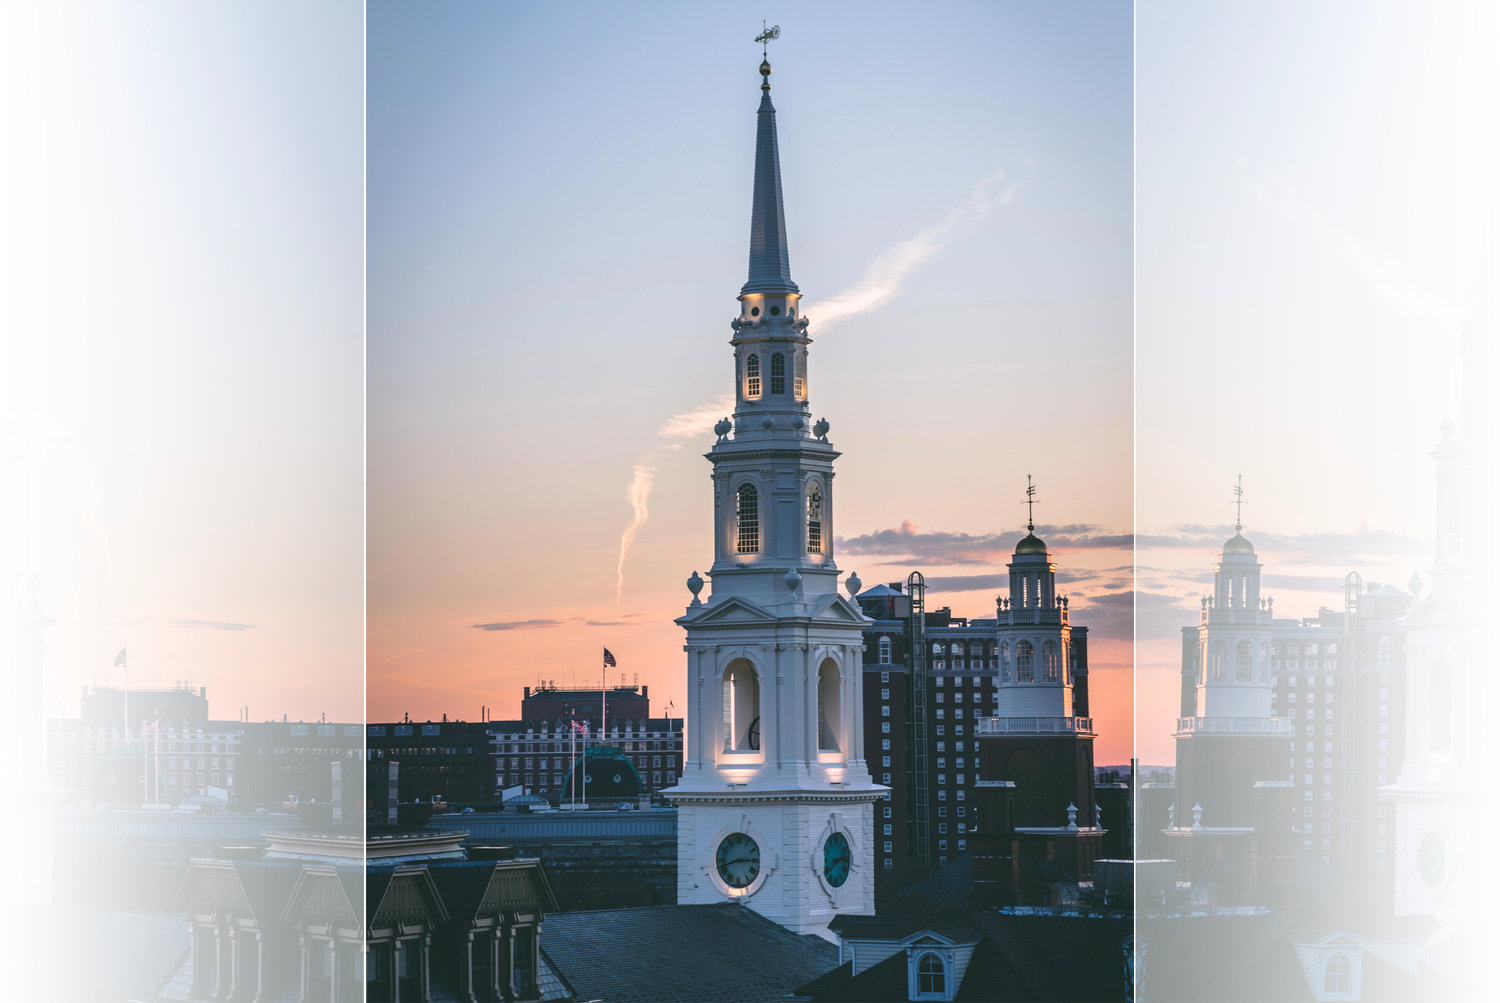 Perched on College Hill, you can catch a glimpse of the city, including the landmark steeple of First Baptist Church